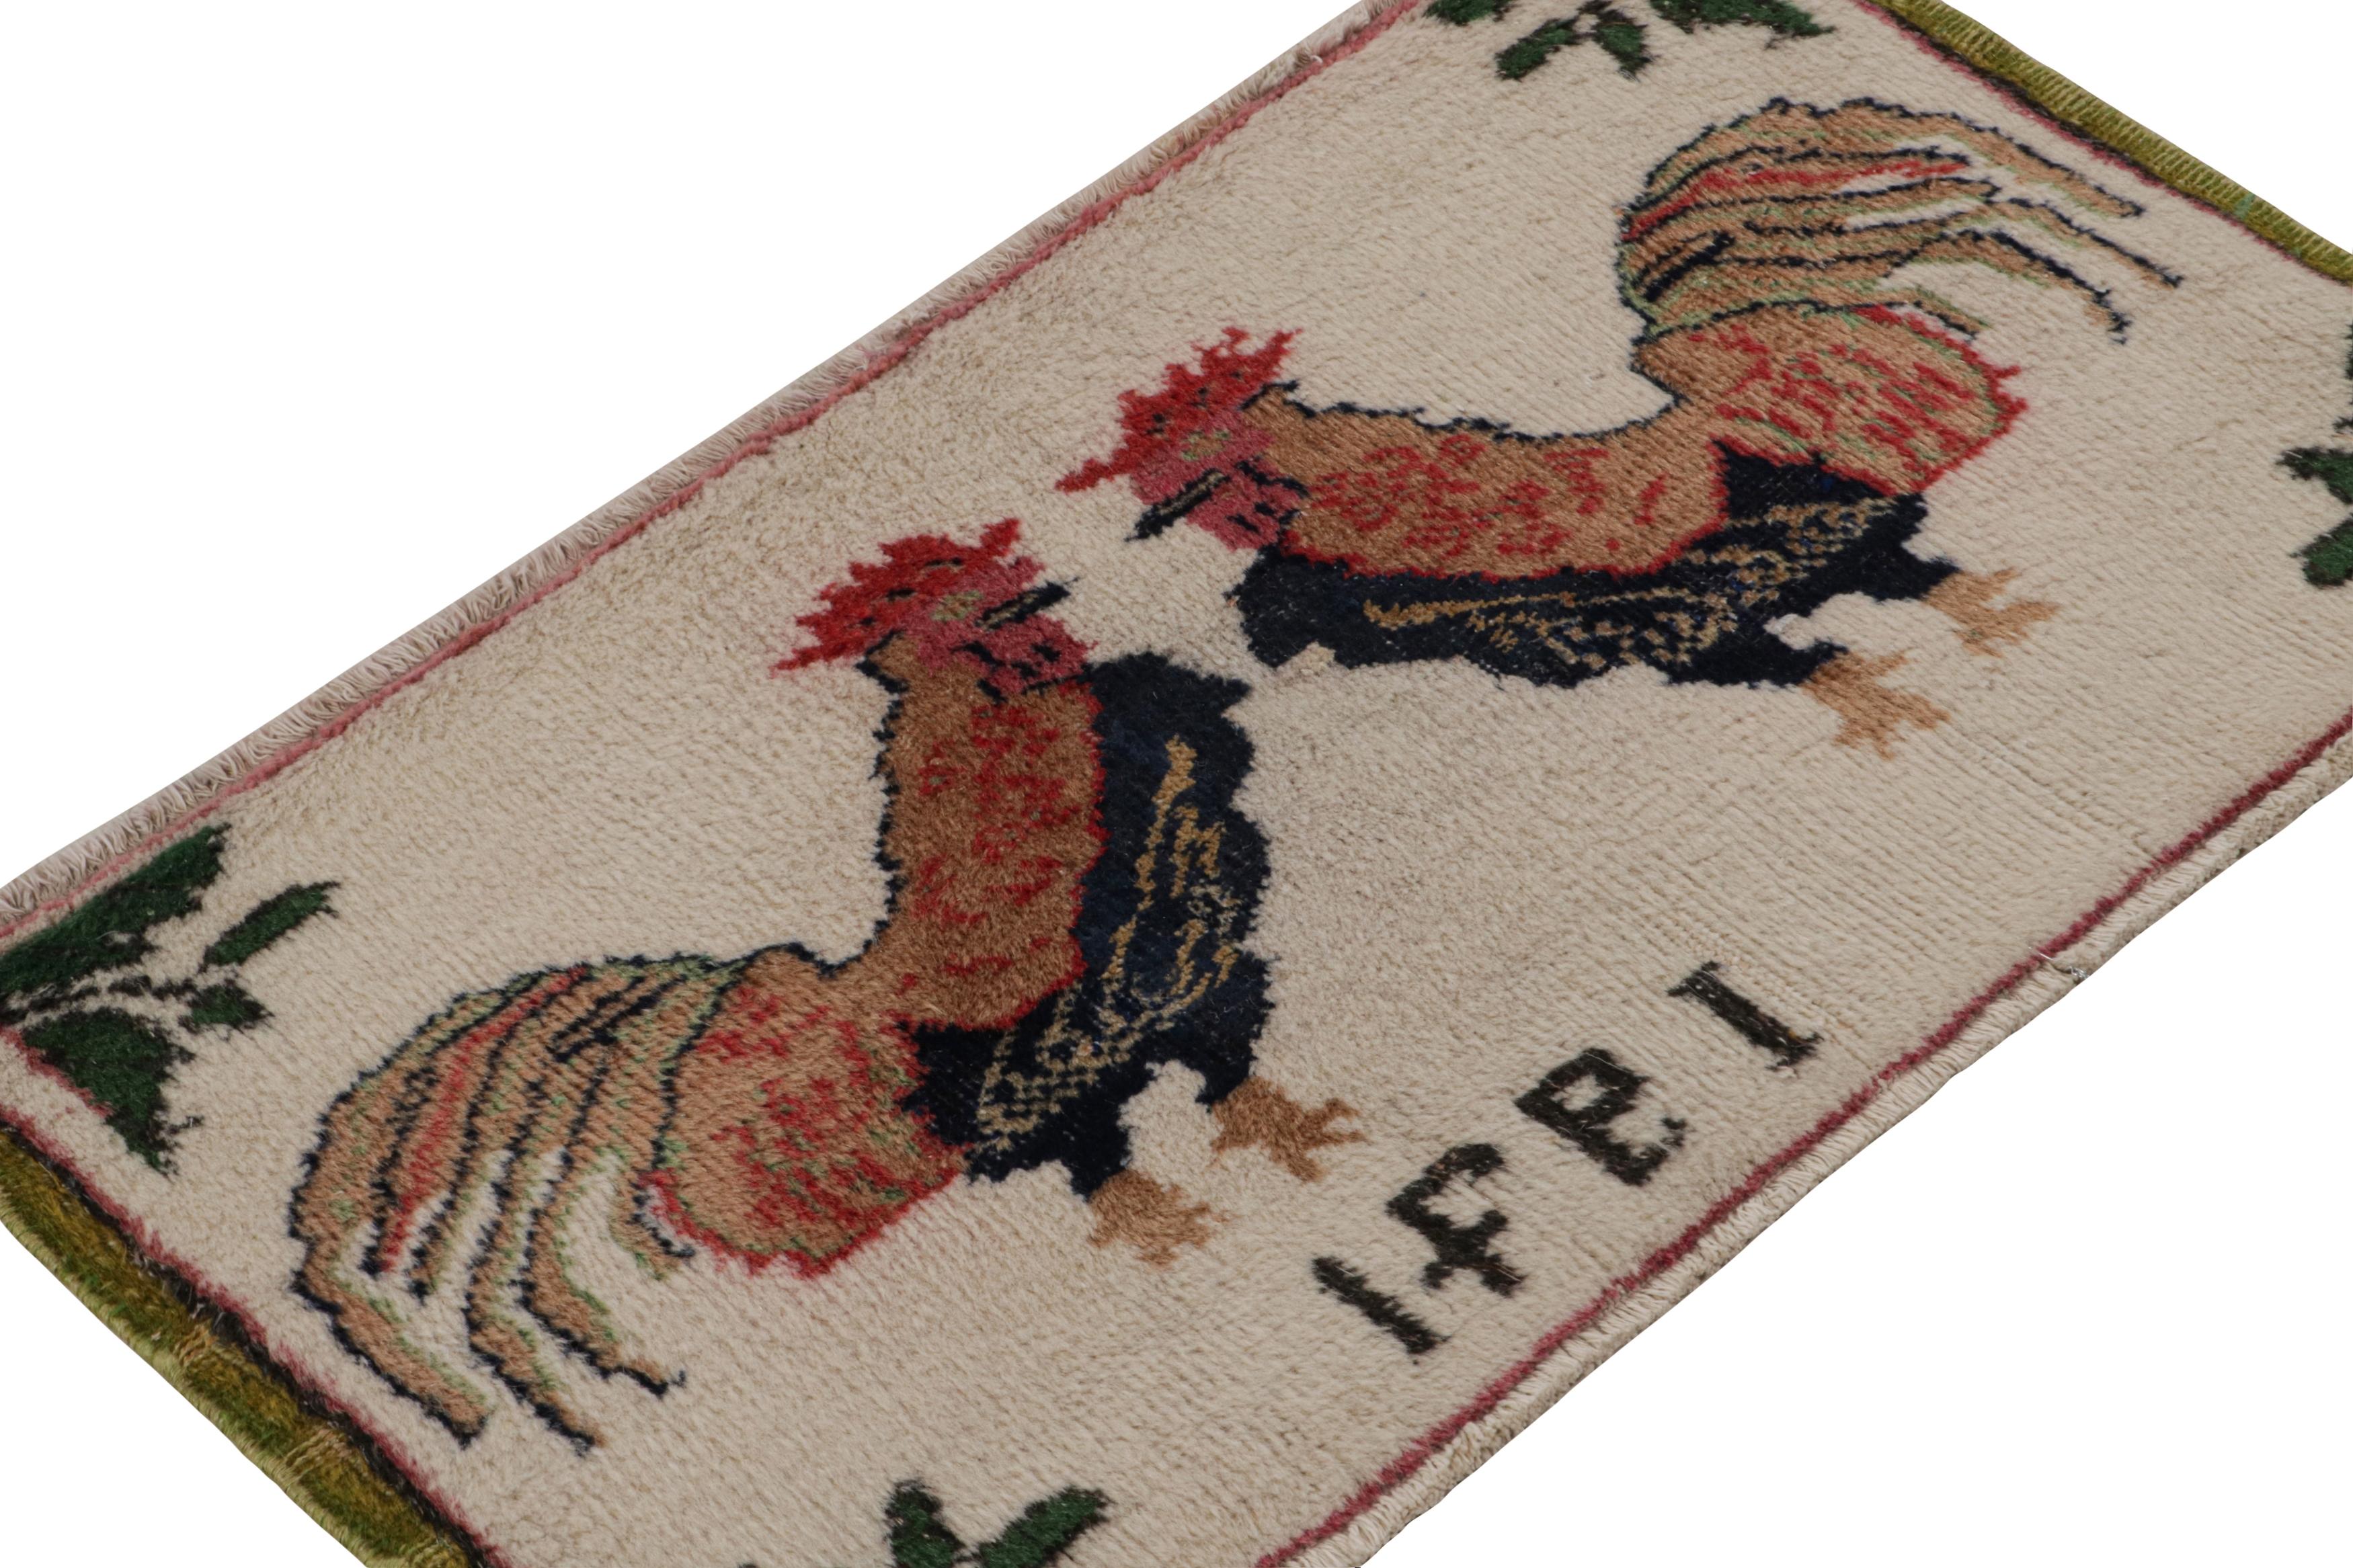 Hand knotted in wool, this 2x3 vintage Turkish rug has a rare pictorial design with twin roosters—an exciting new curation from Rug & Kilim. With the inclusion of a woven origin year lower in the field, its design may be attributed to the works of